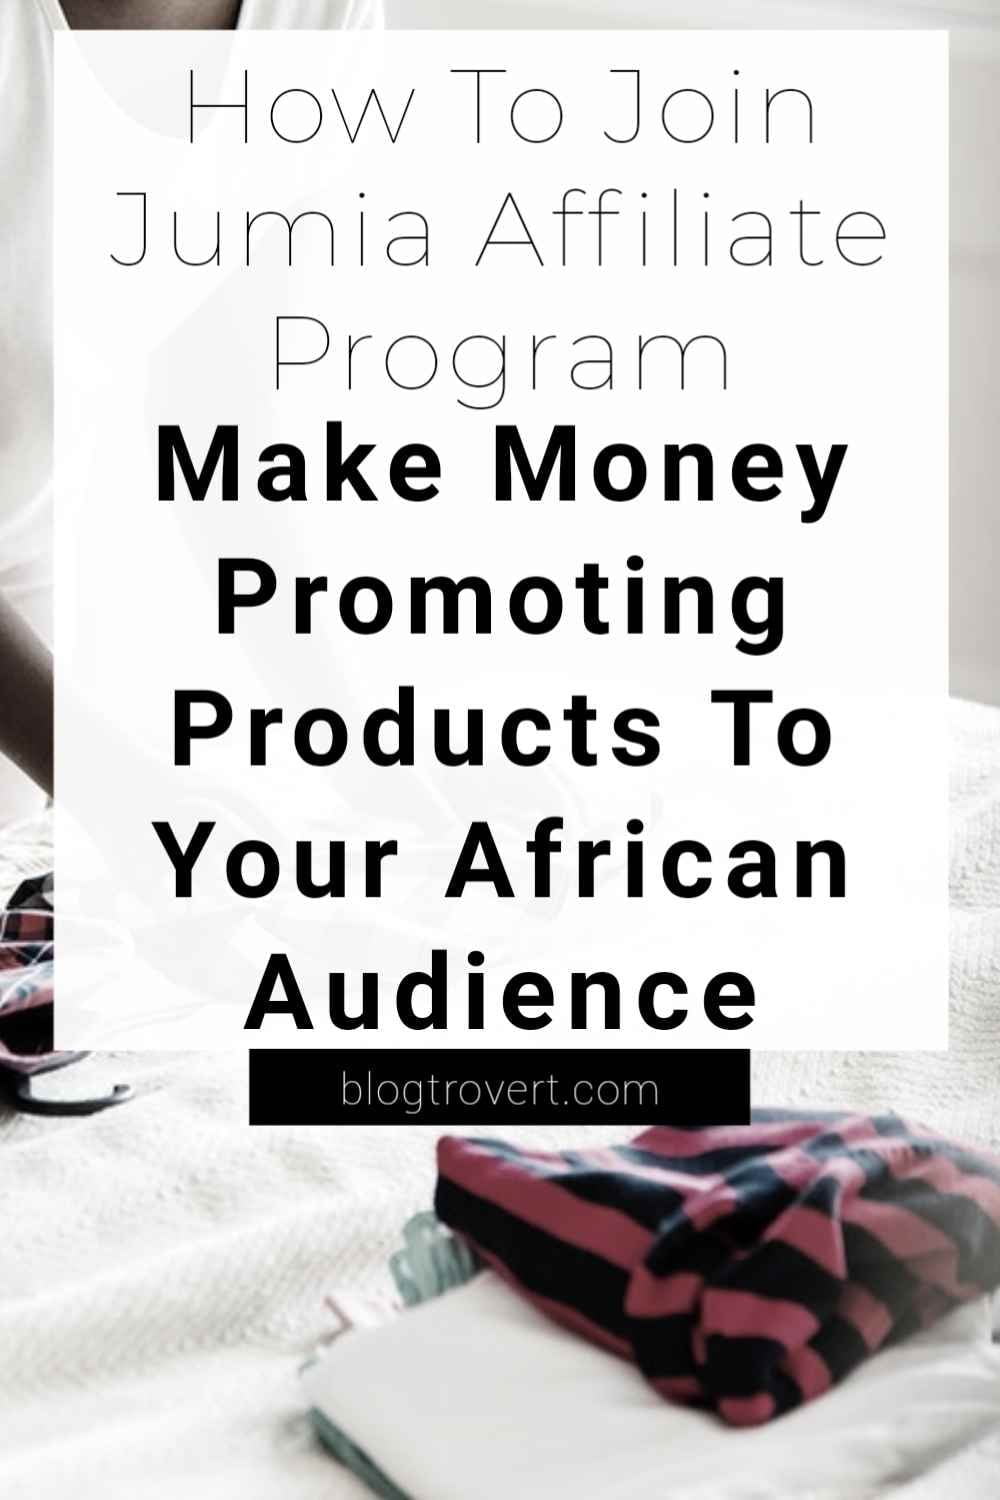 How to make money with Jumia affiliate program - the ultimate guide 3